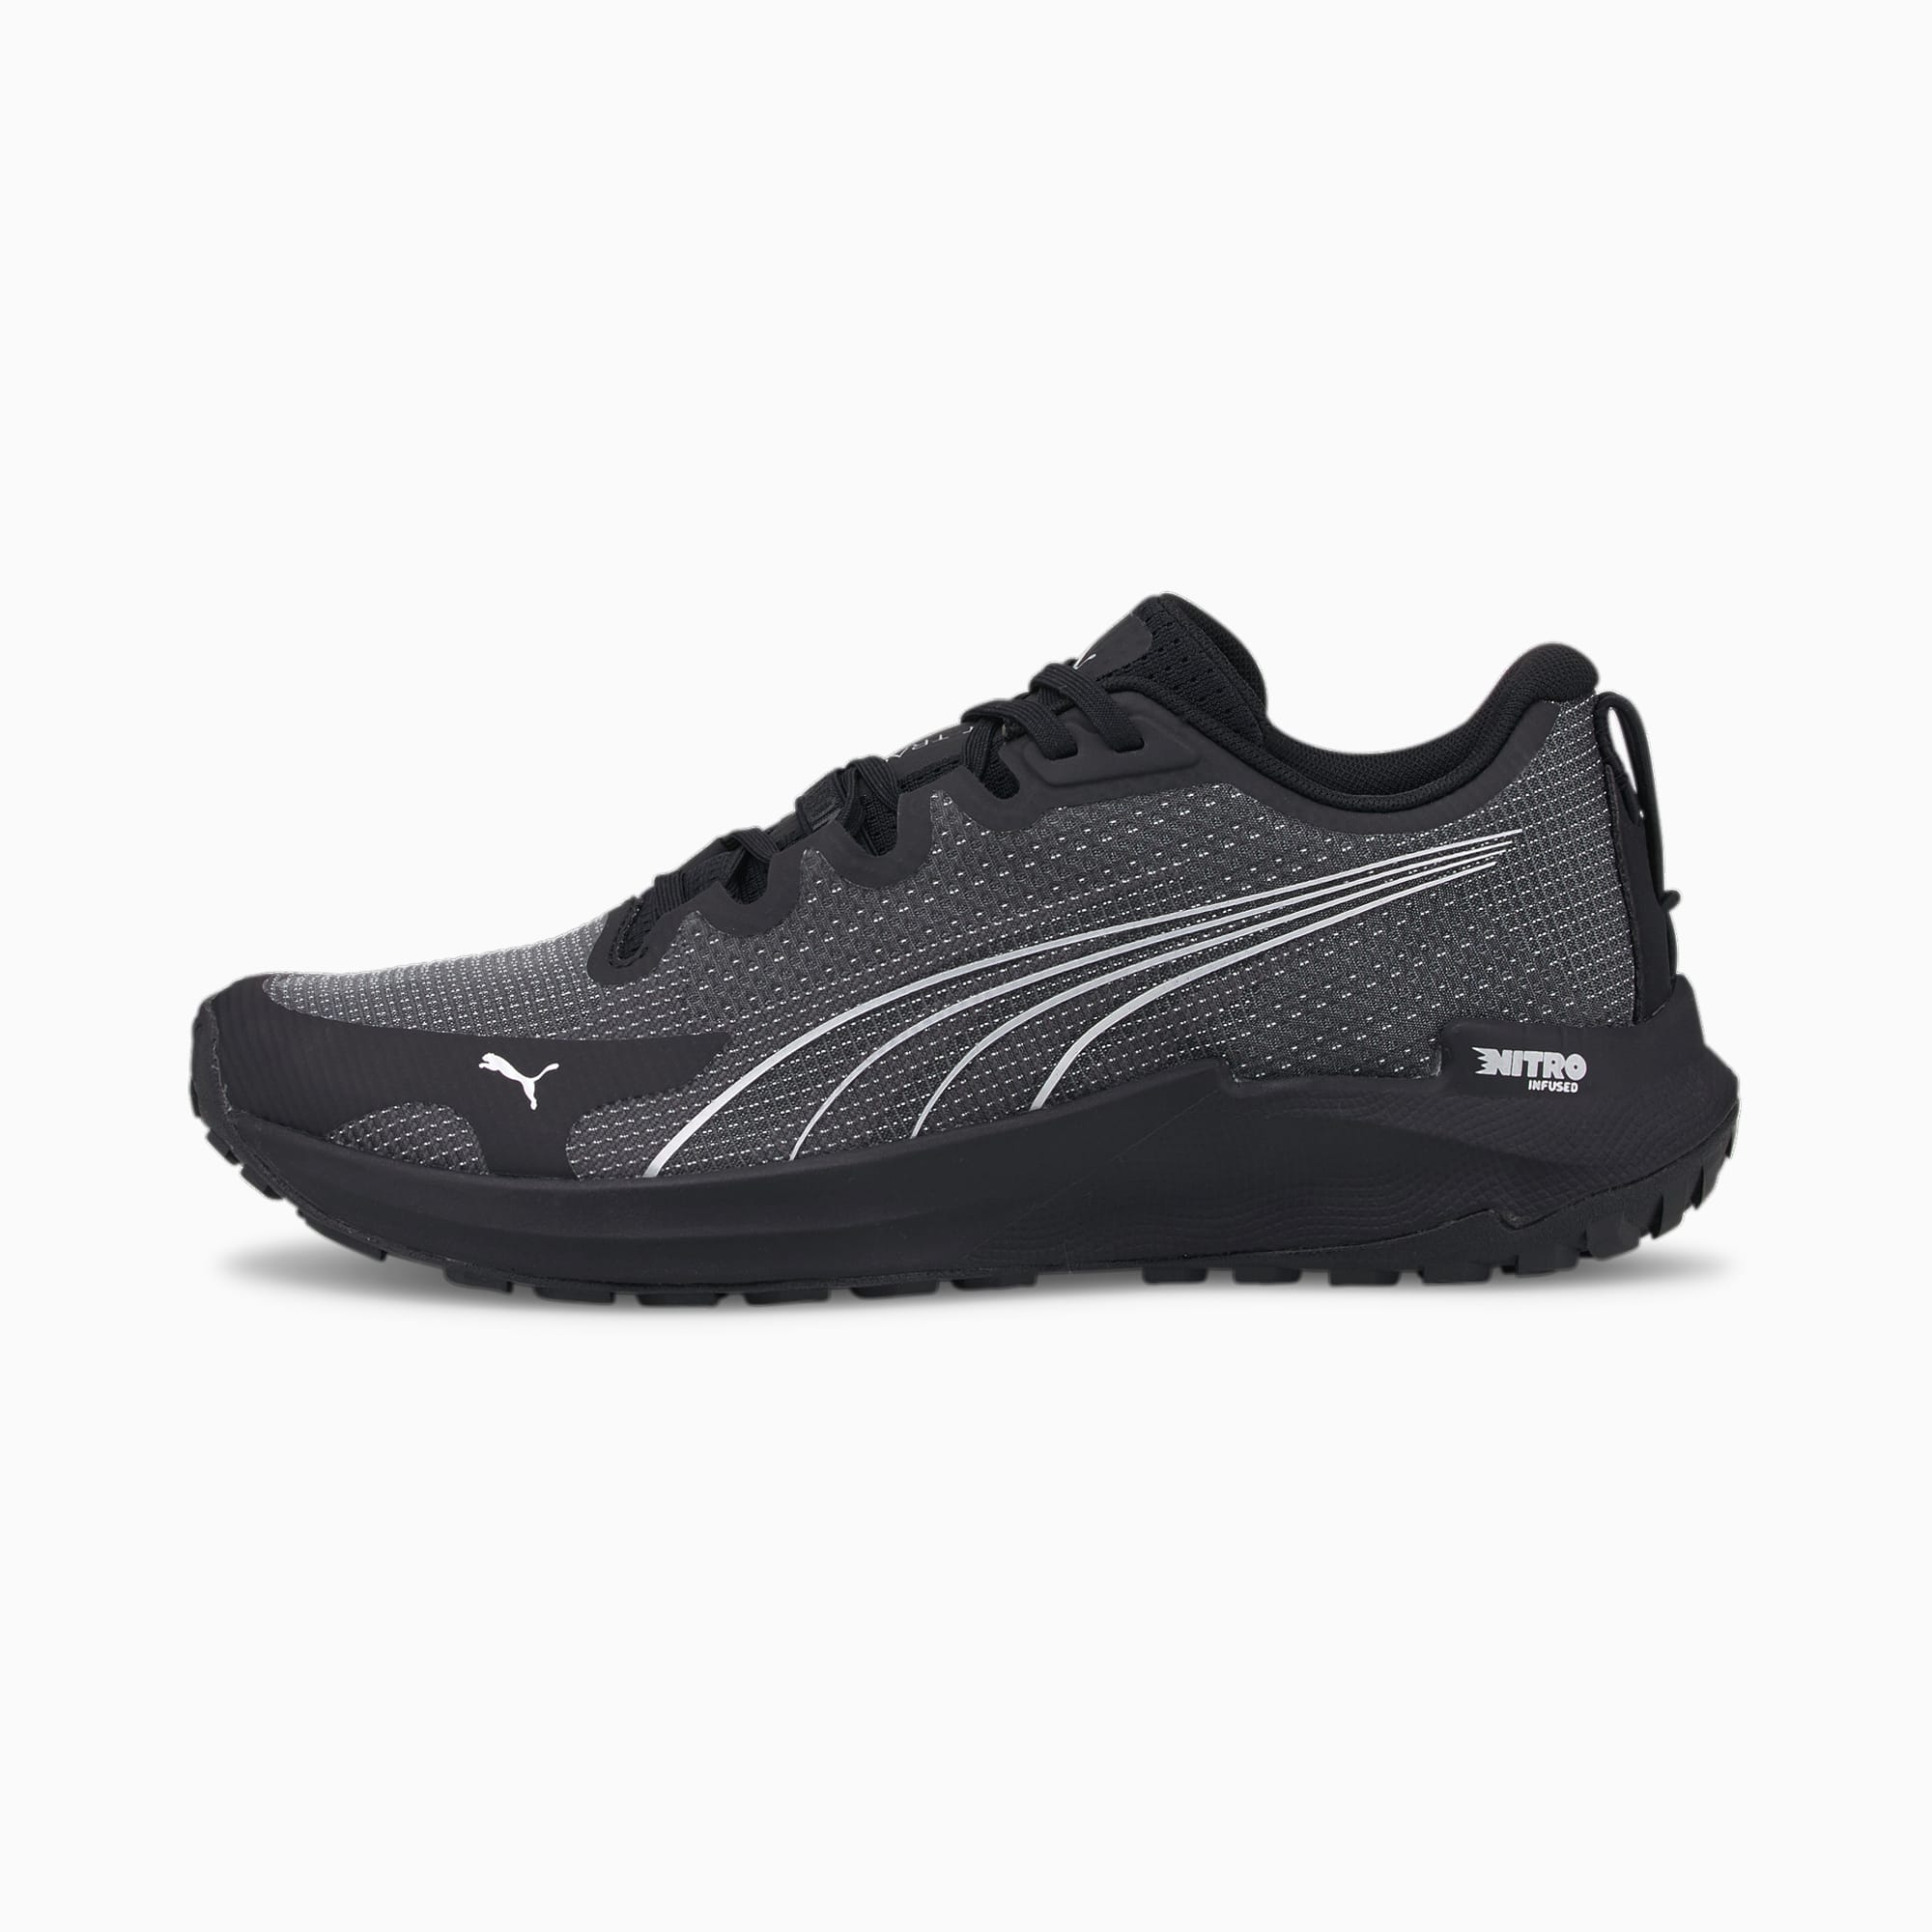 Buy Best Trekking Shoes For Hiking Online At Best Price Offers | PUMA